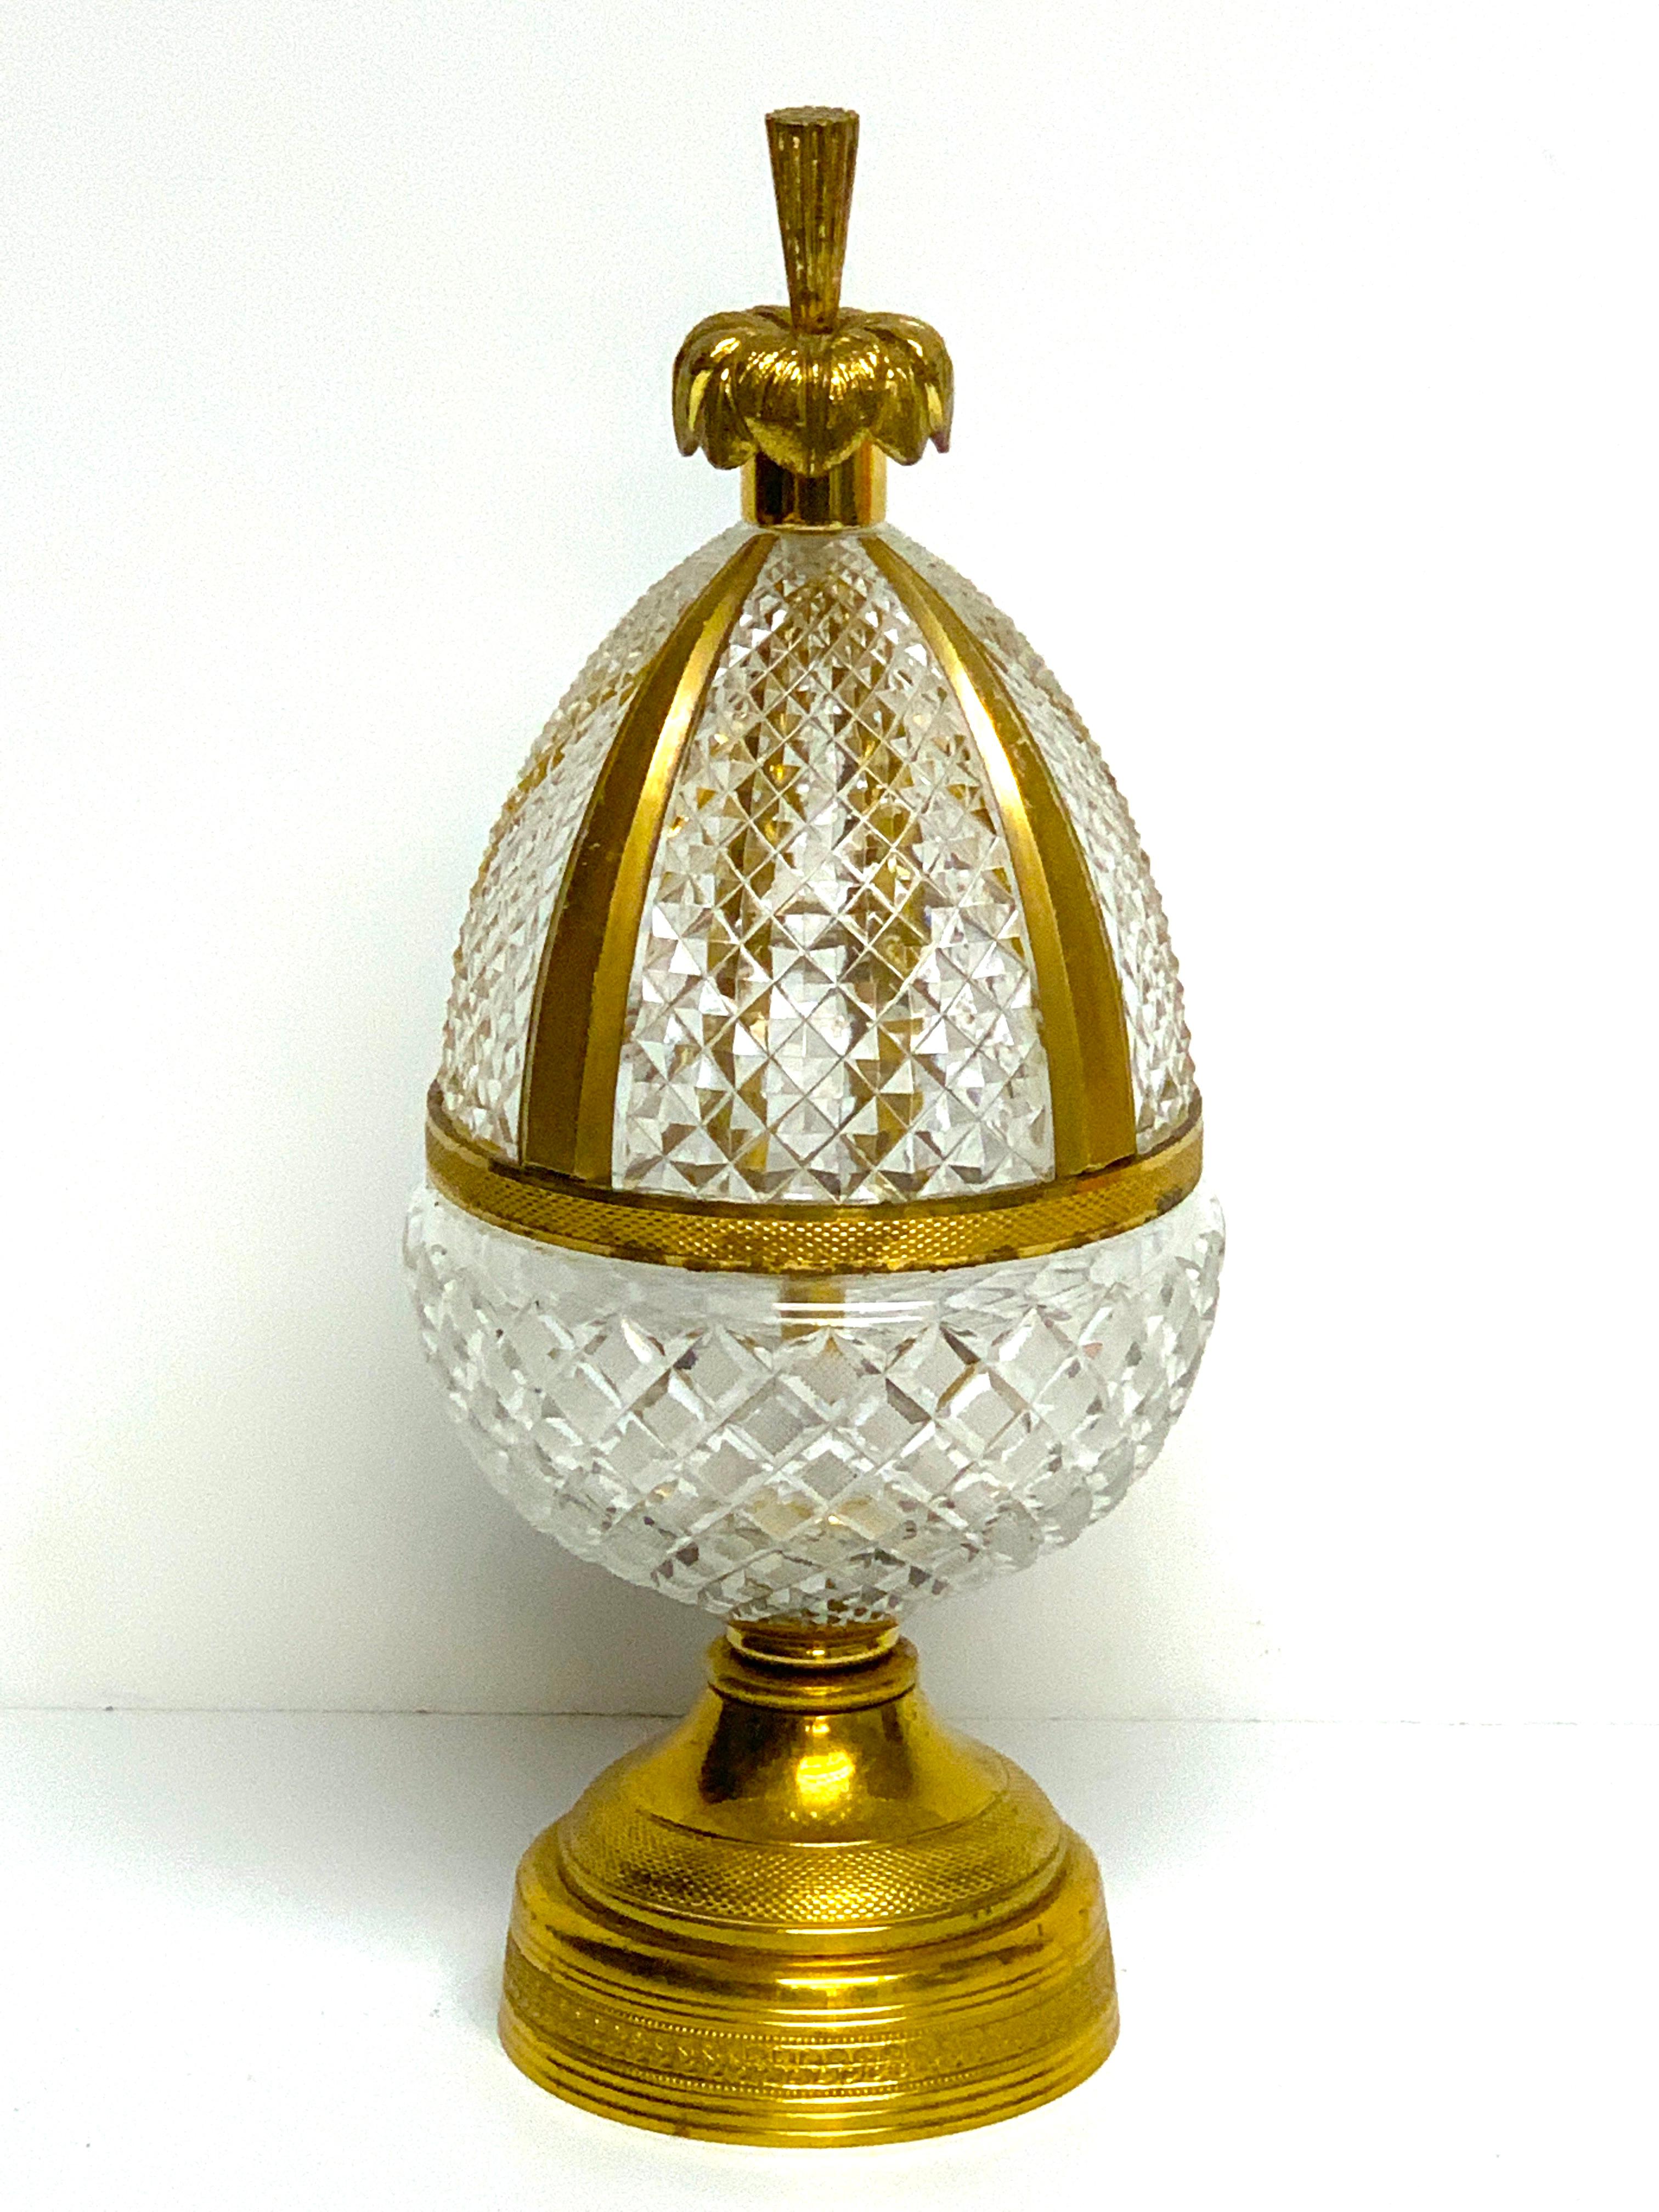 Baccarat style ormolu, cut and gilt crystal newel post, of egg form finely cut and faceted, raised on a 4-inch diameter base.